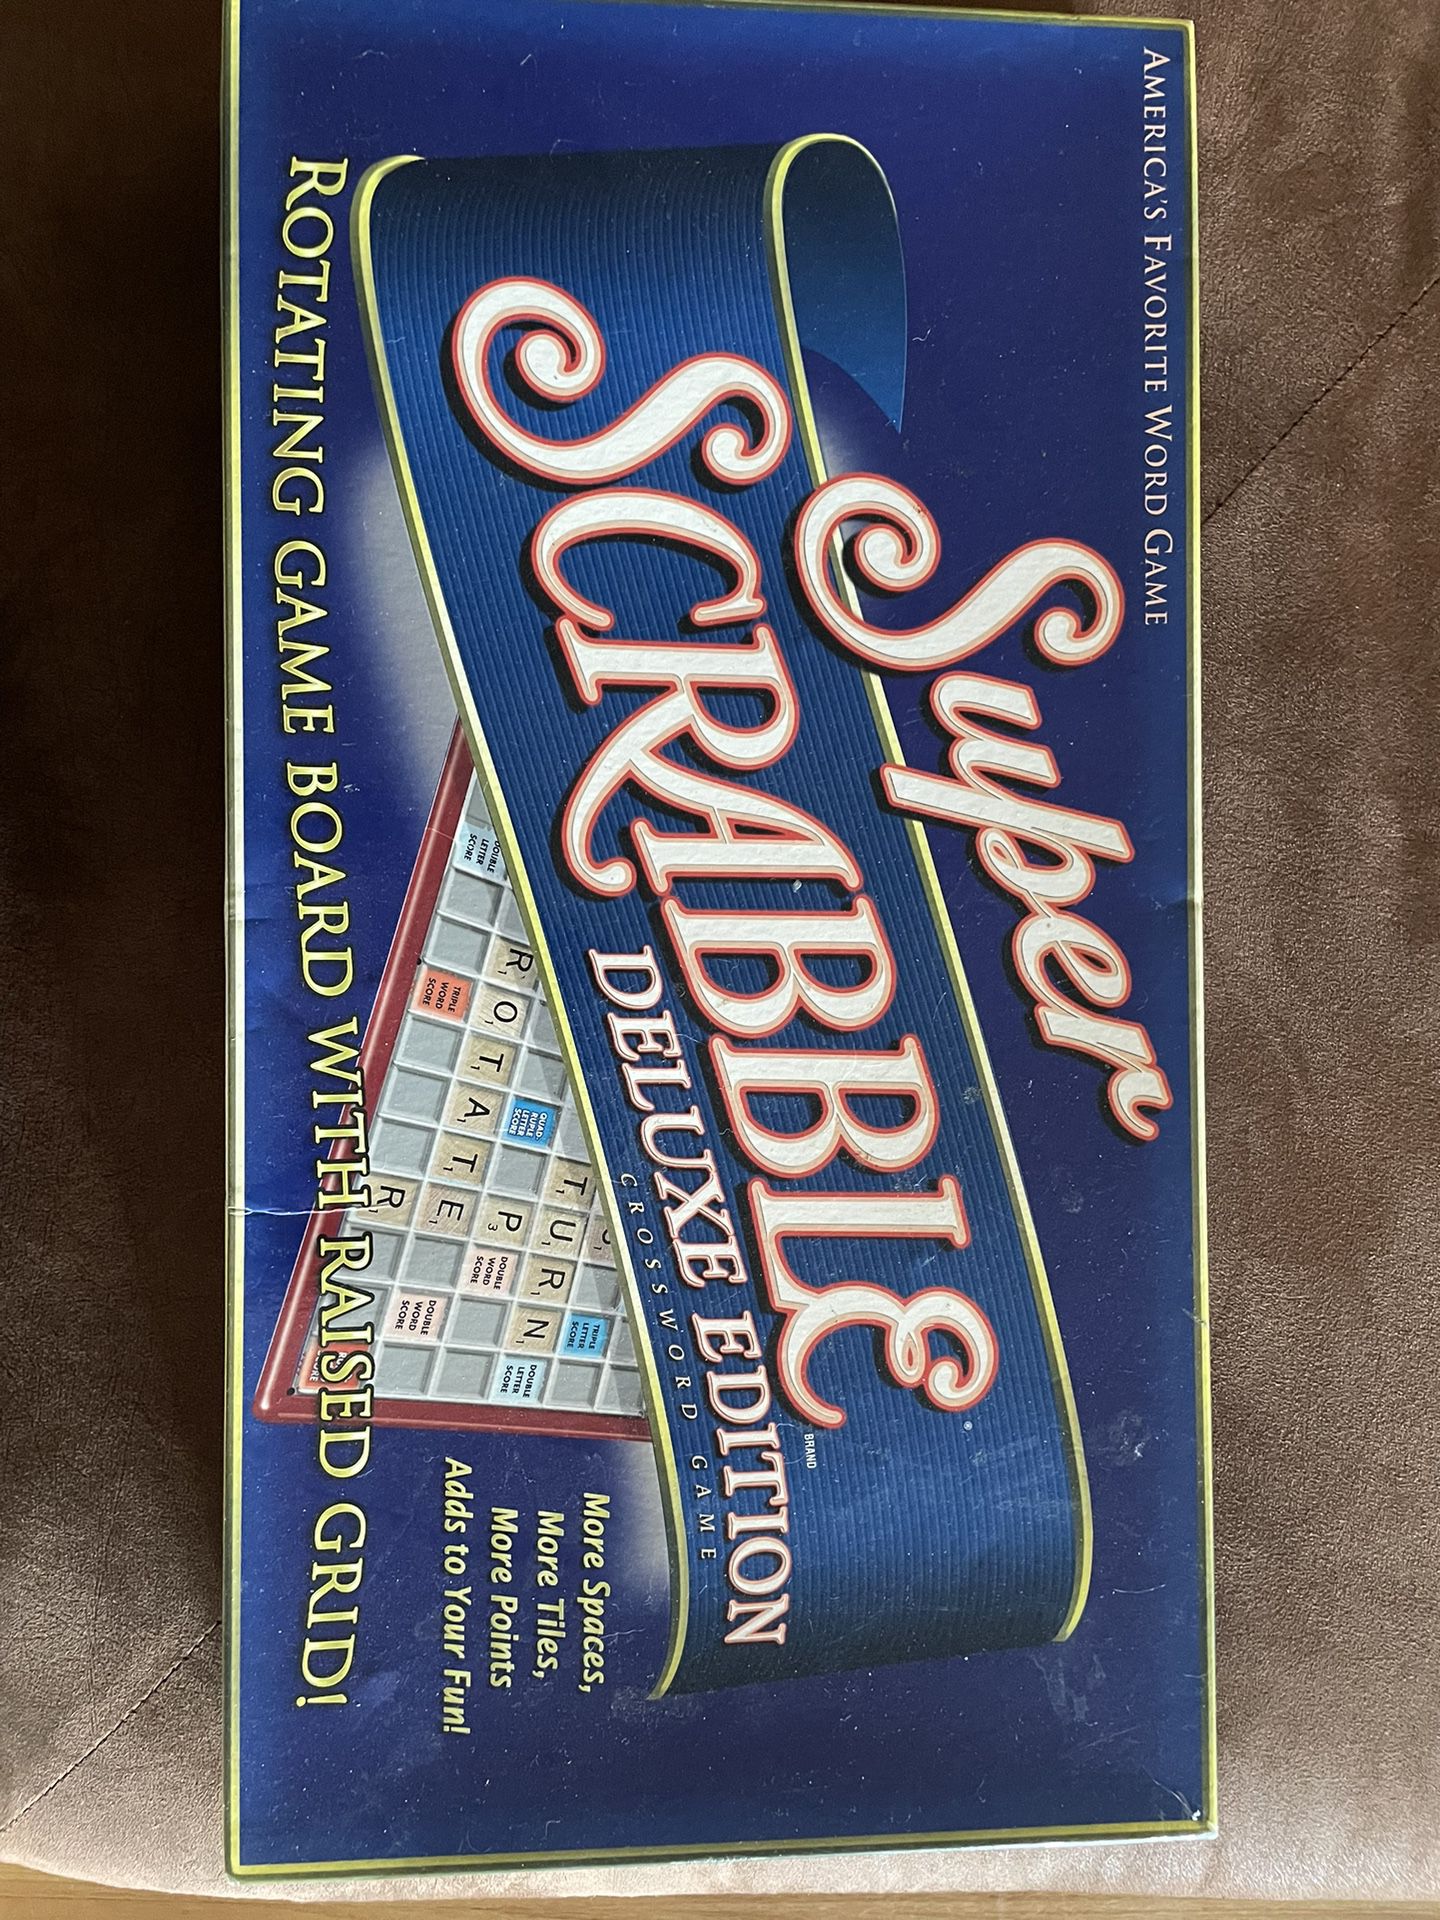 Super Scrabble Spinning Board Game.  